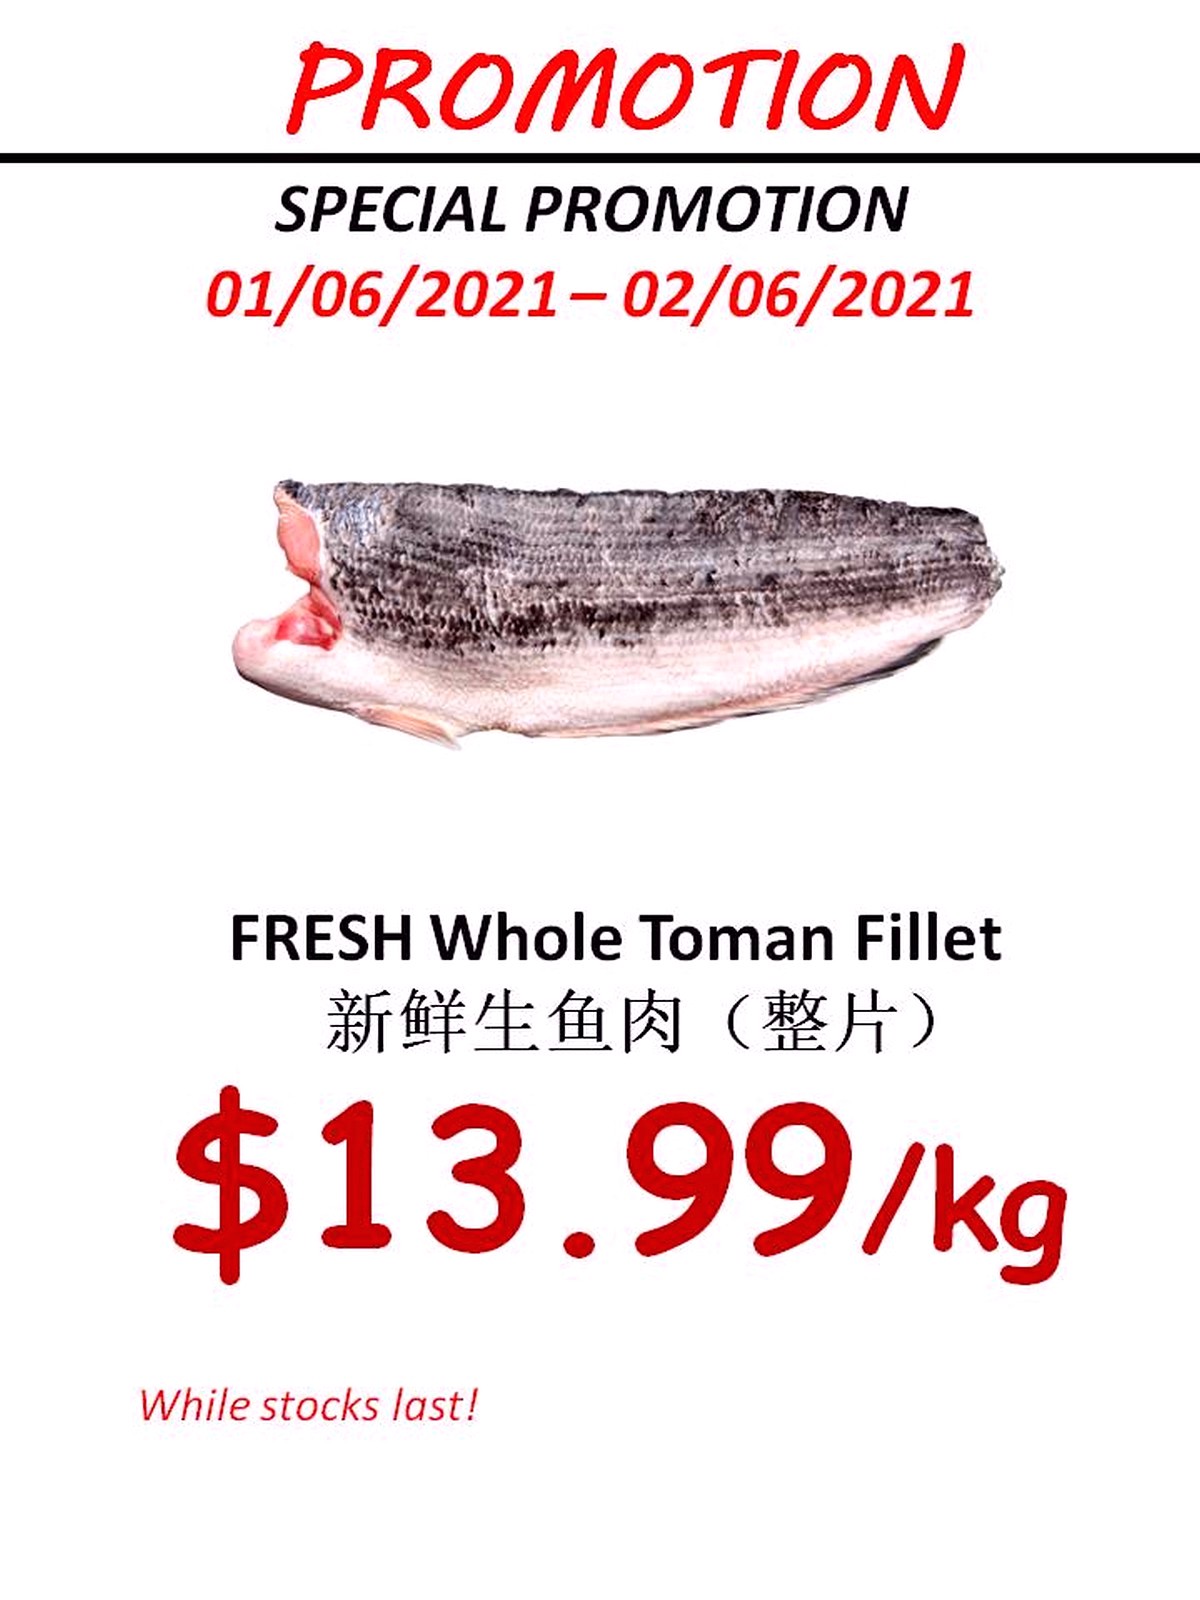 Sheng-Siong-Today-Fresh-Fish-Seafood-Promotion-2021-Singapore-00b Now till 17 Jun  2021: Sheng Siong Mega Promotion! 2 Fresh Seabass for $9.88 only